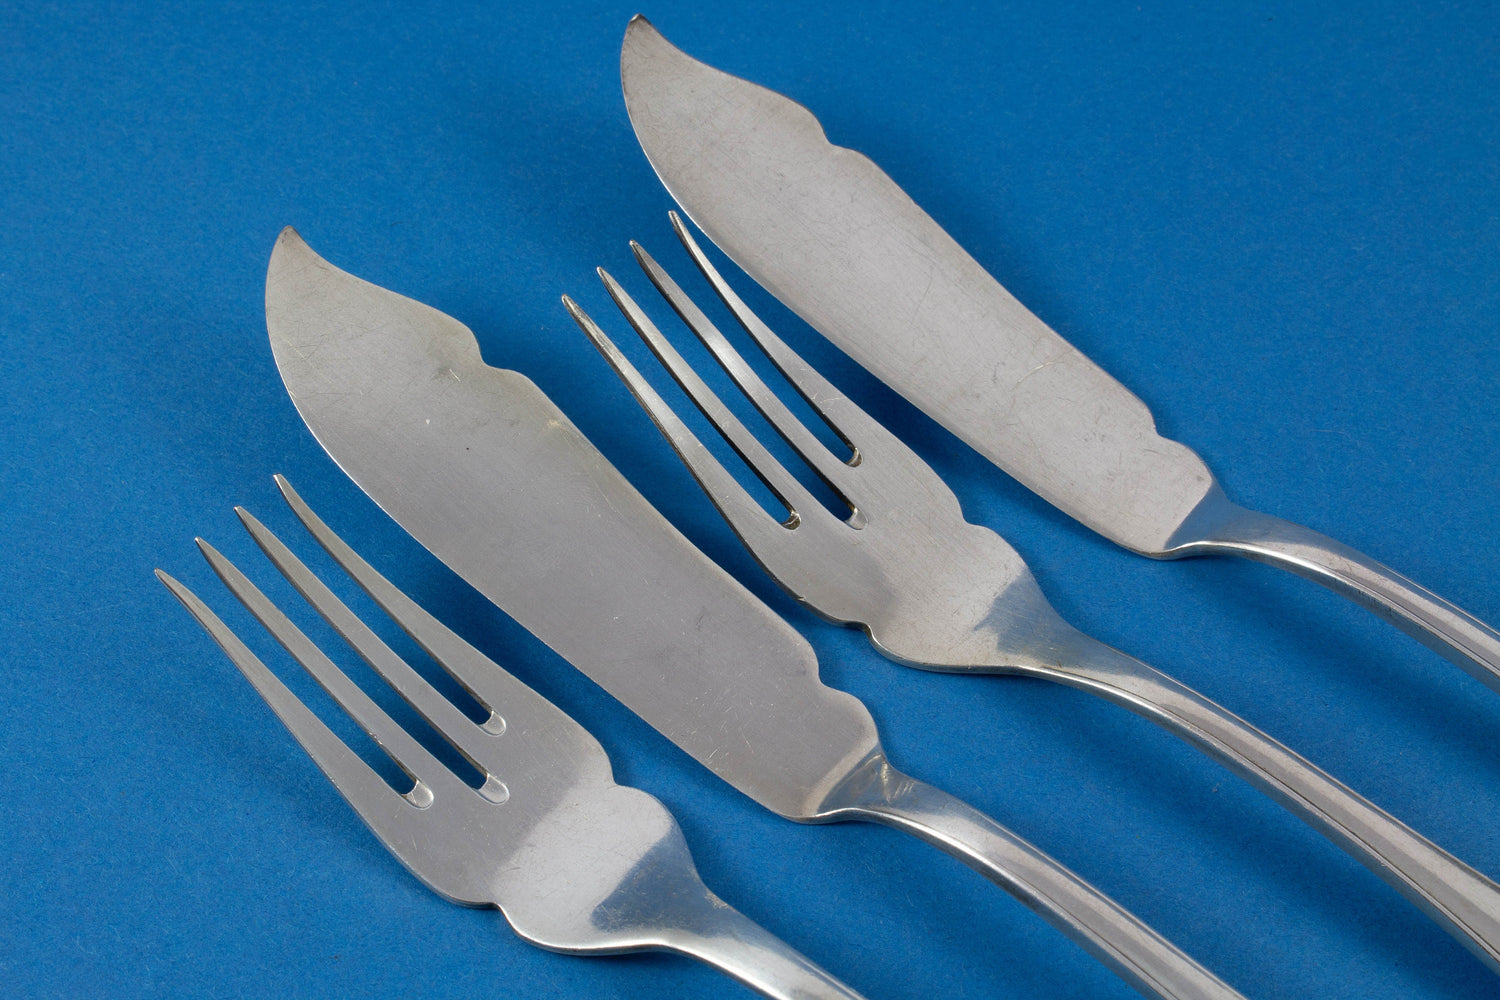 Fish cutlery for 2 people, candle light dinner, 2 fish forks, 2 fish knives